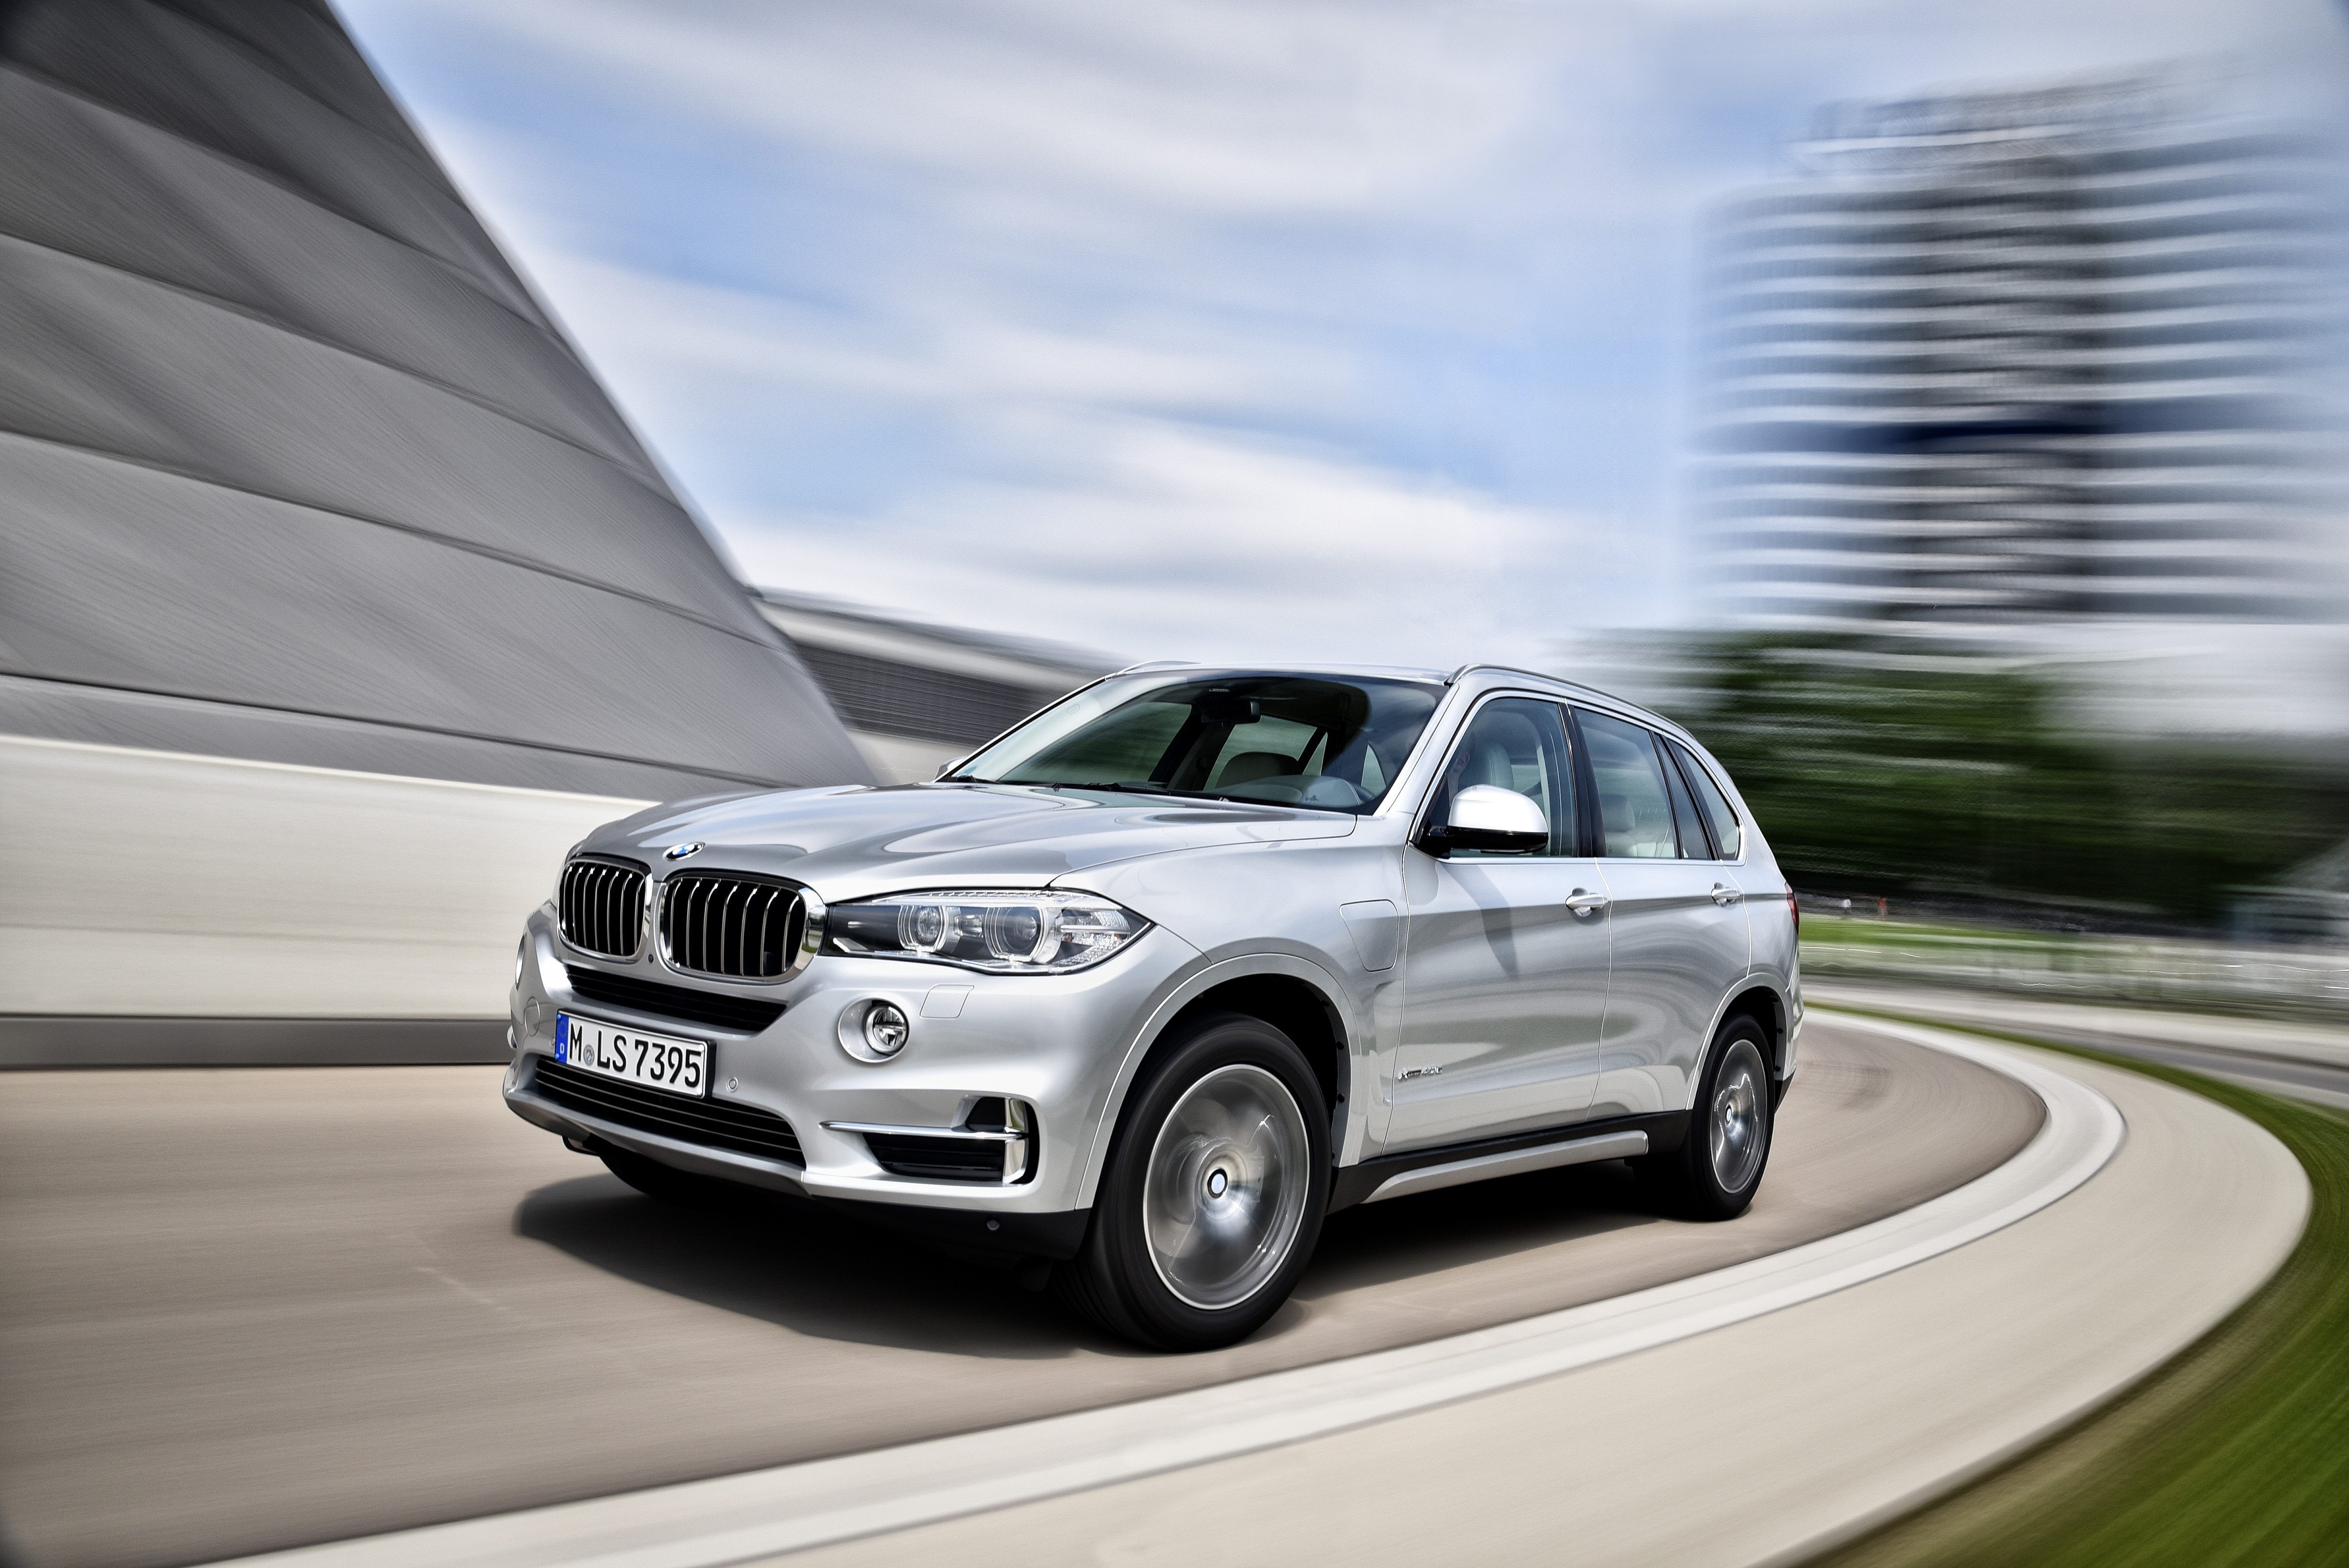 2018 BMW X5 Prices, Reviews, and Photos - MotorTrend